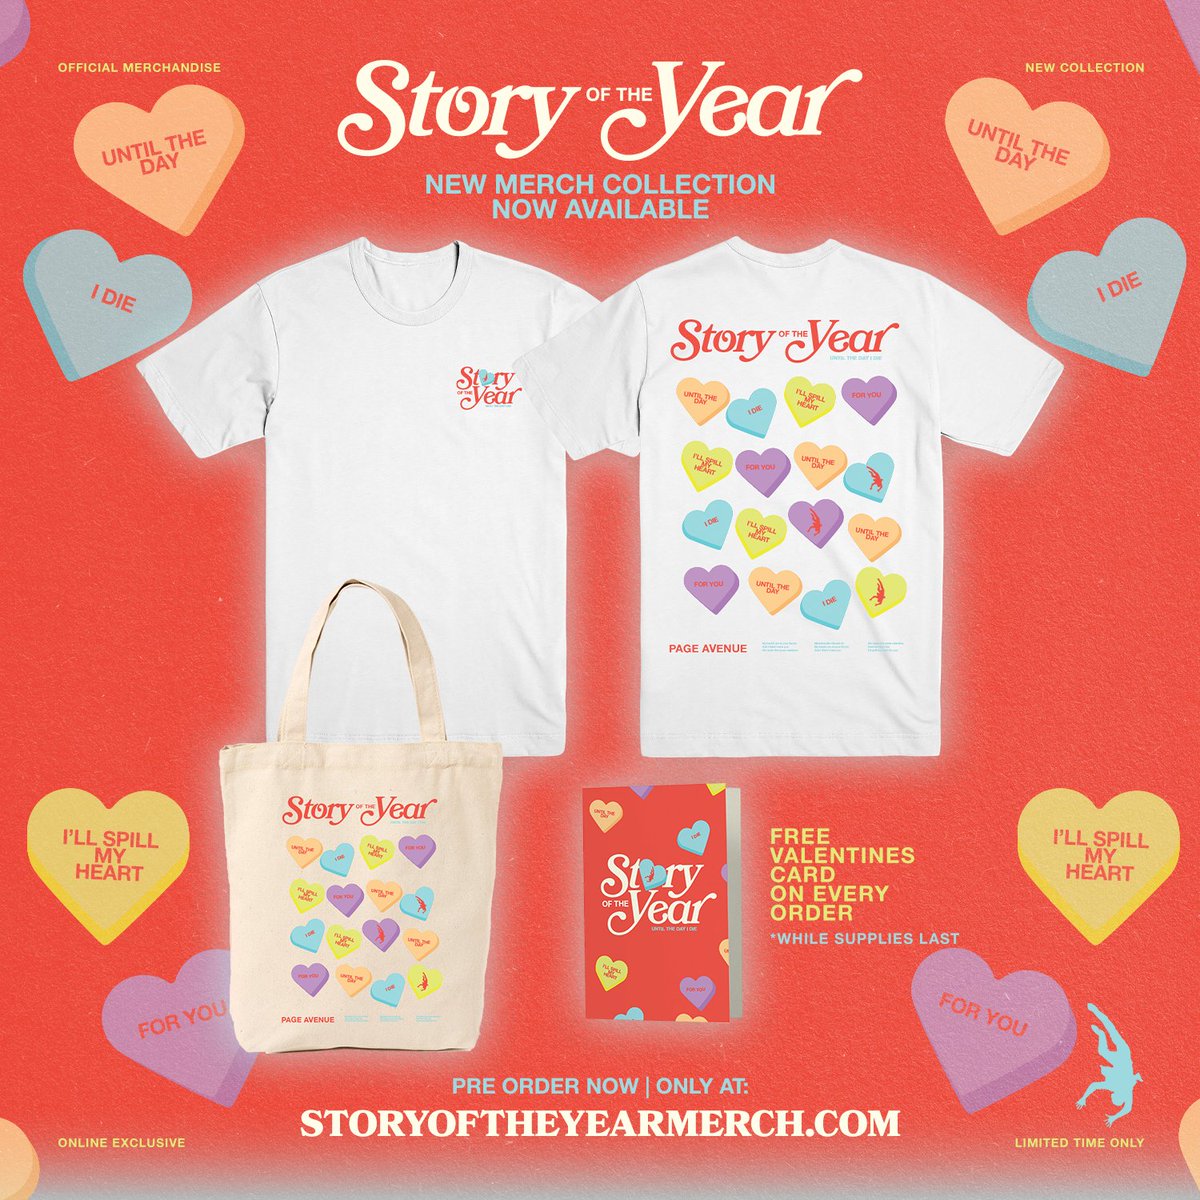 SALE ENDS SOON! Pre-Orders for our Valentine's Day Collection end tomorrow! Order now at: storyoftheyearmerch.com.